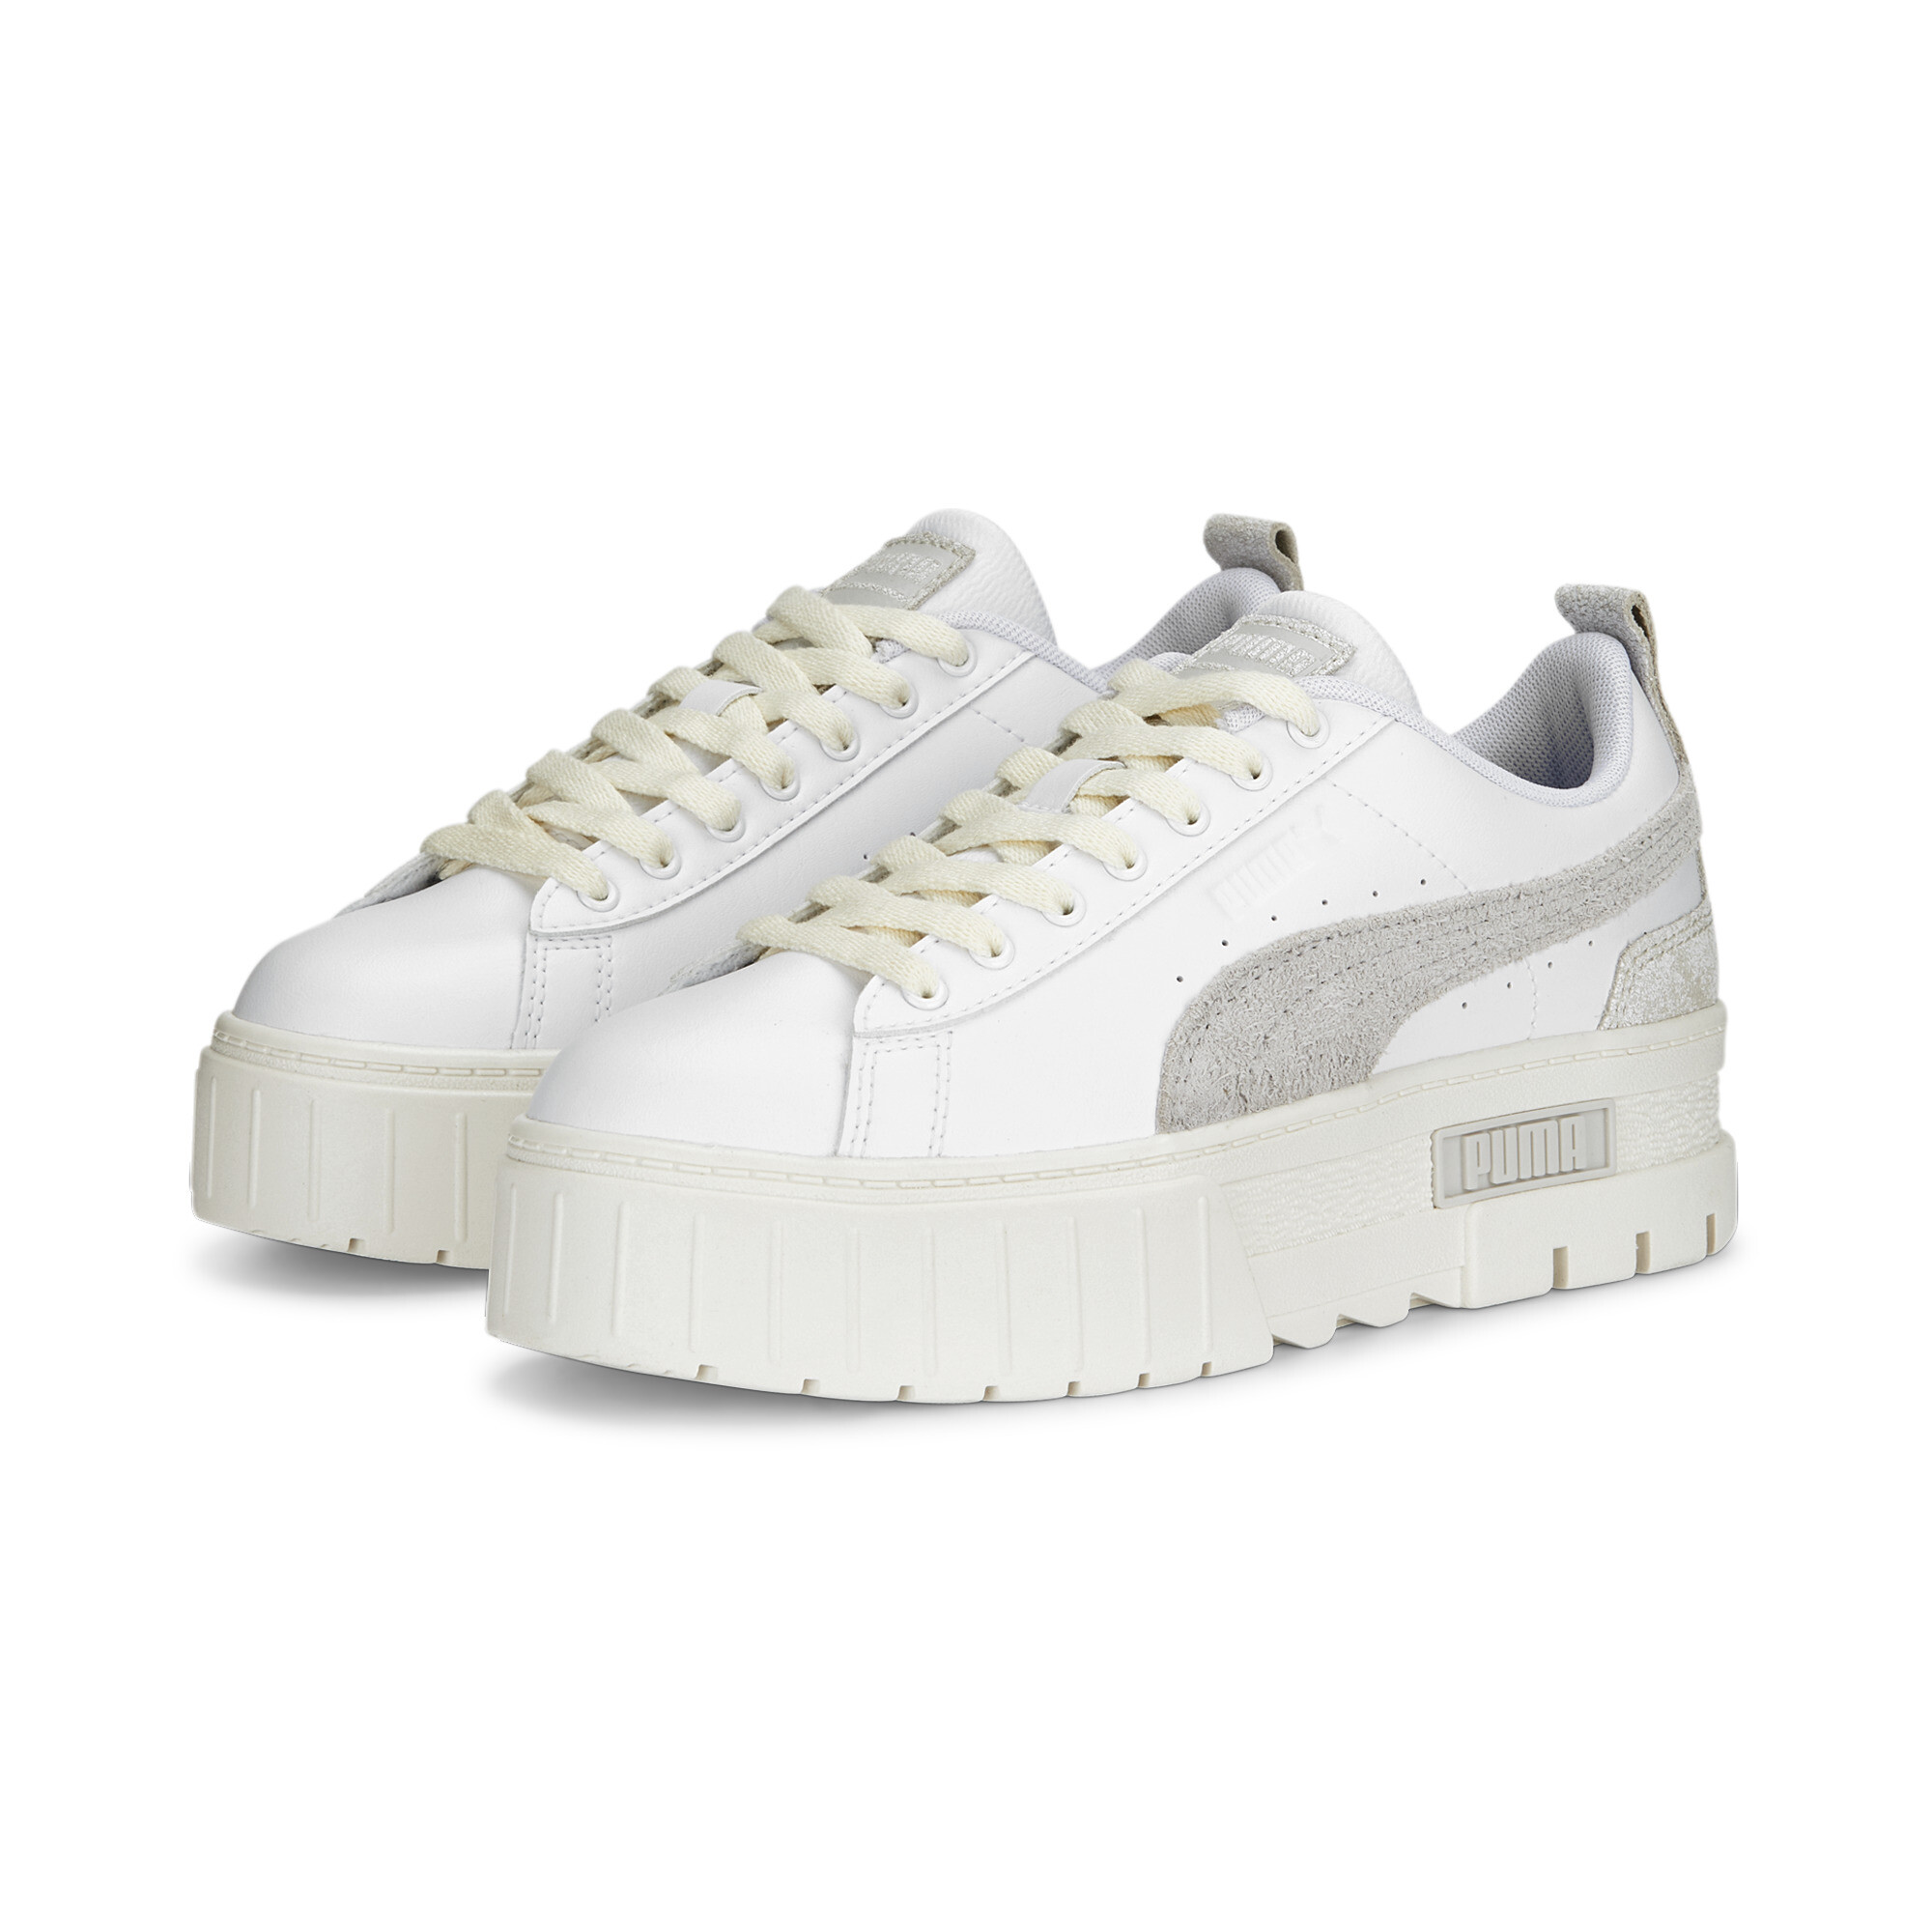 Women's PUMA Mayze Thrifted Sneakers In 20 - White, Size EU 38.5